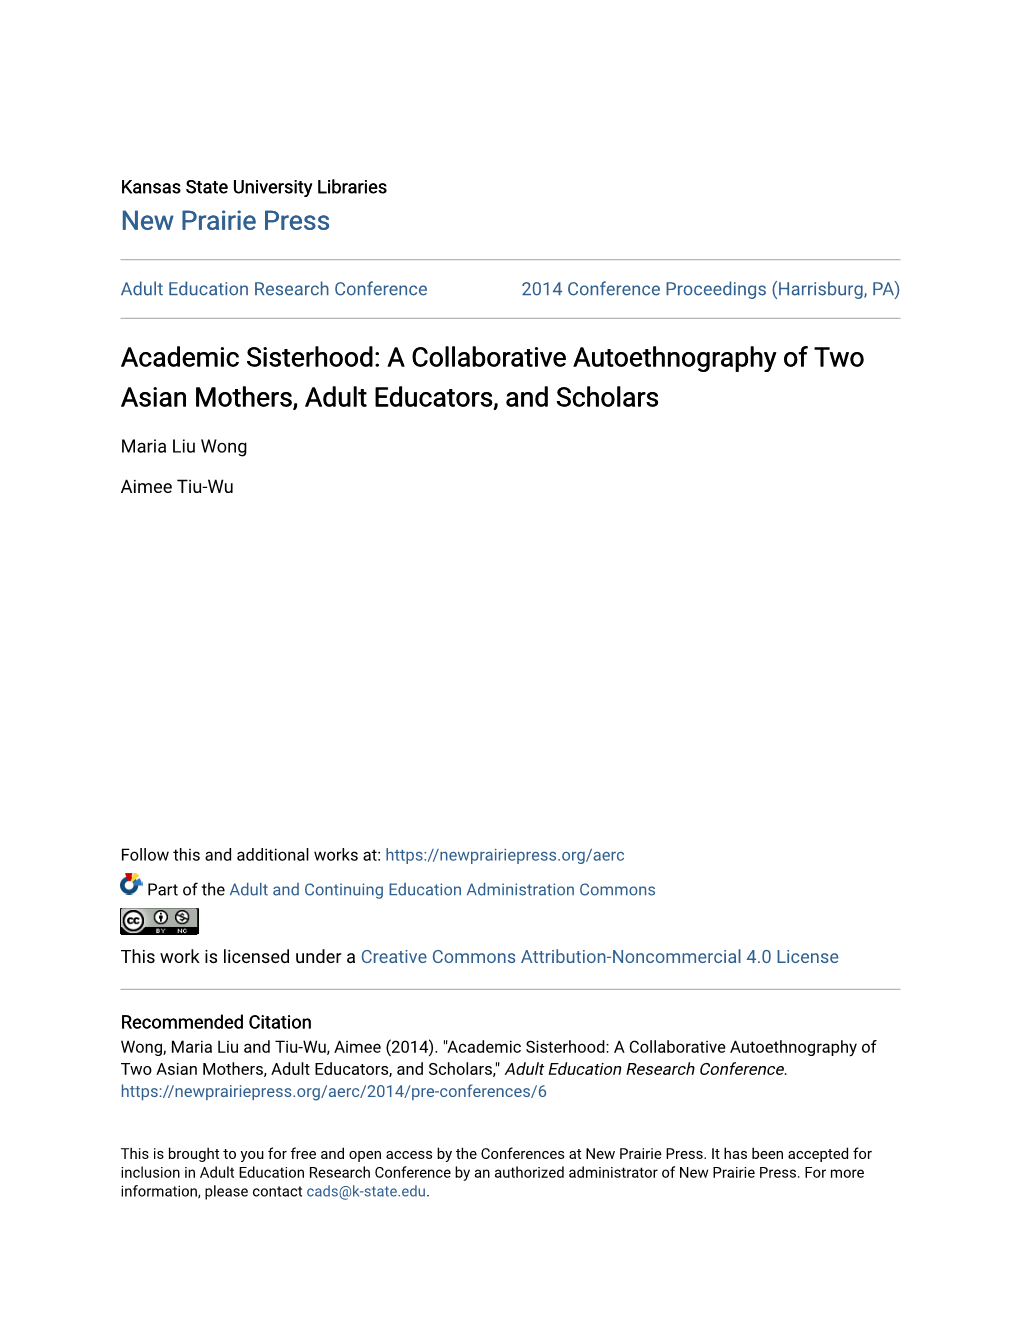 A Collaborative Autoethnography of Two Asian Mothers, Adult Educators, and Scholars